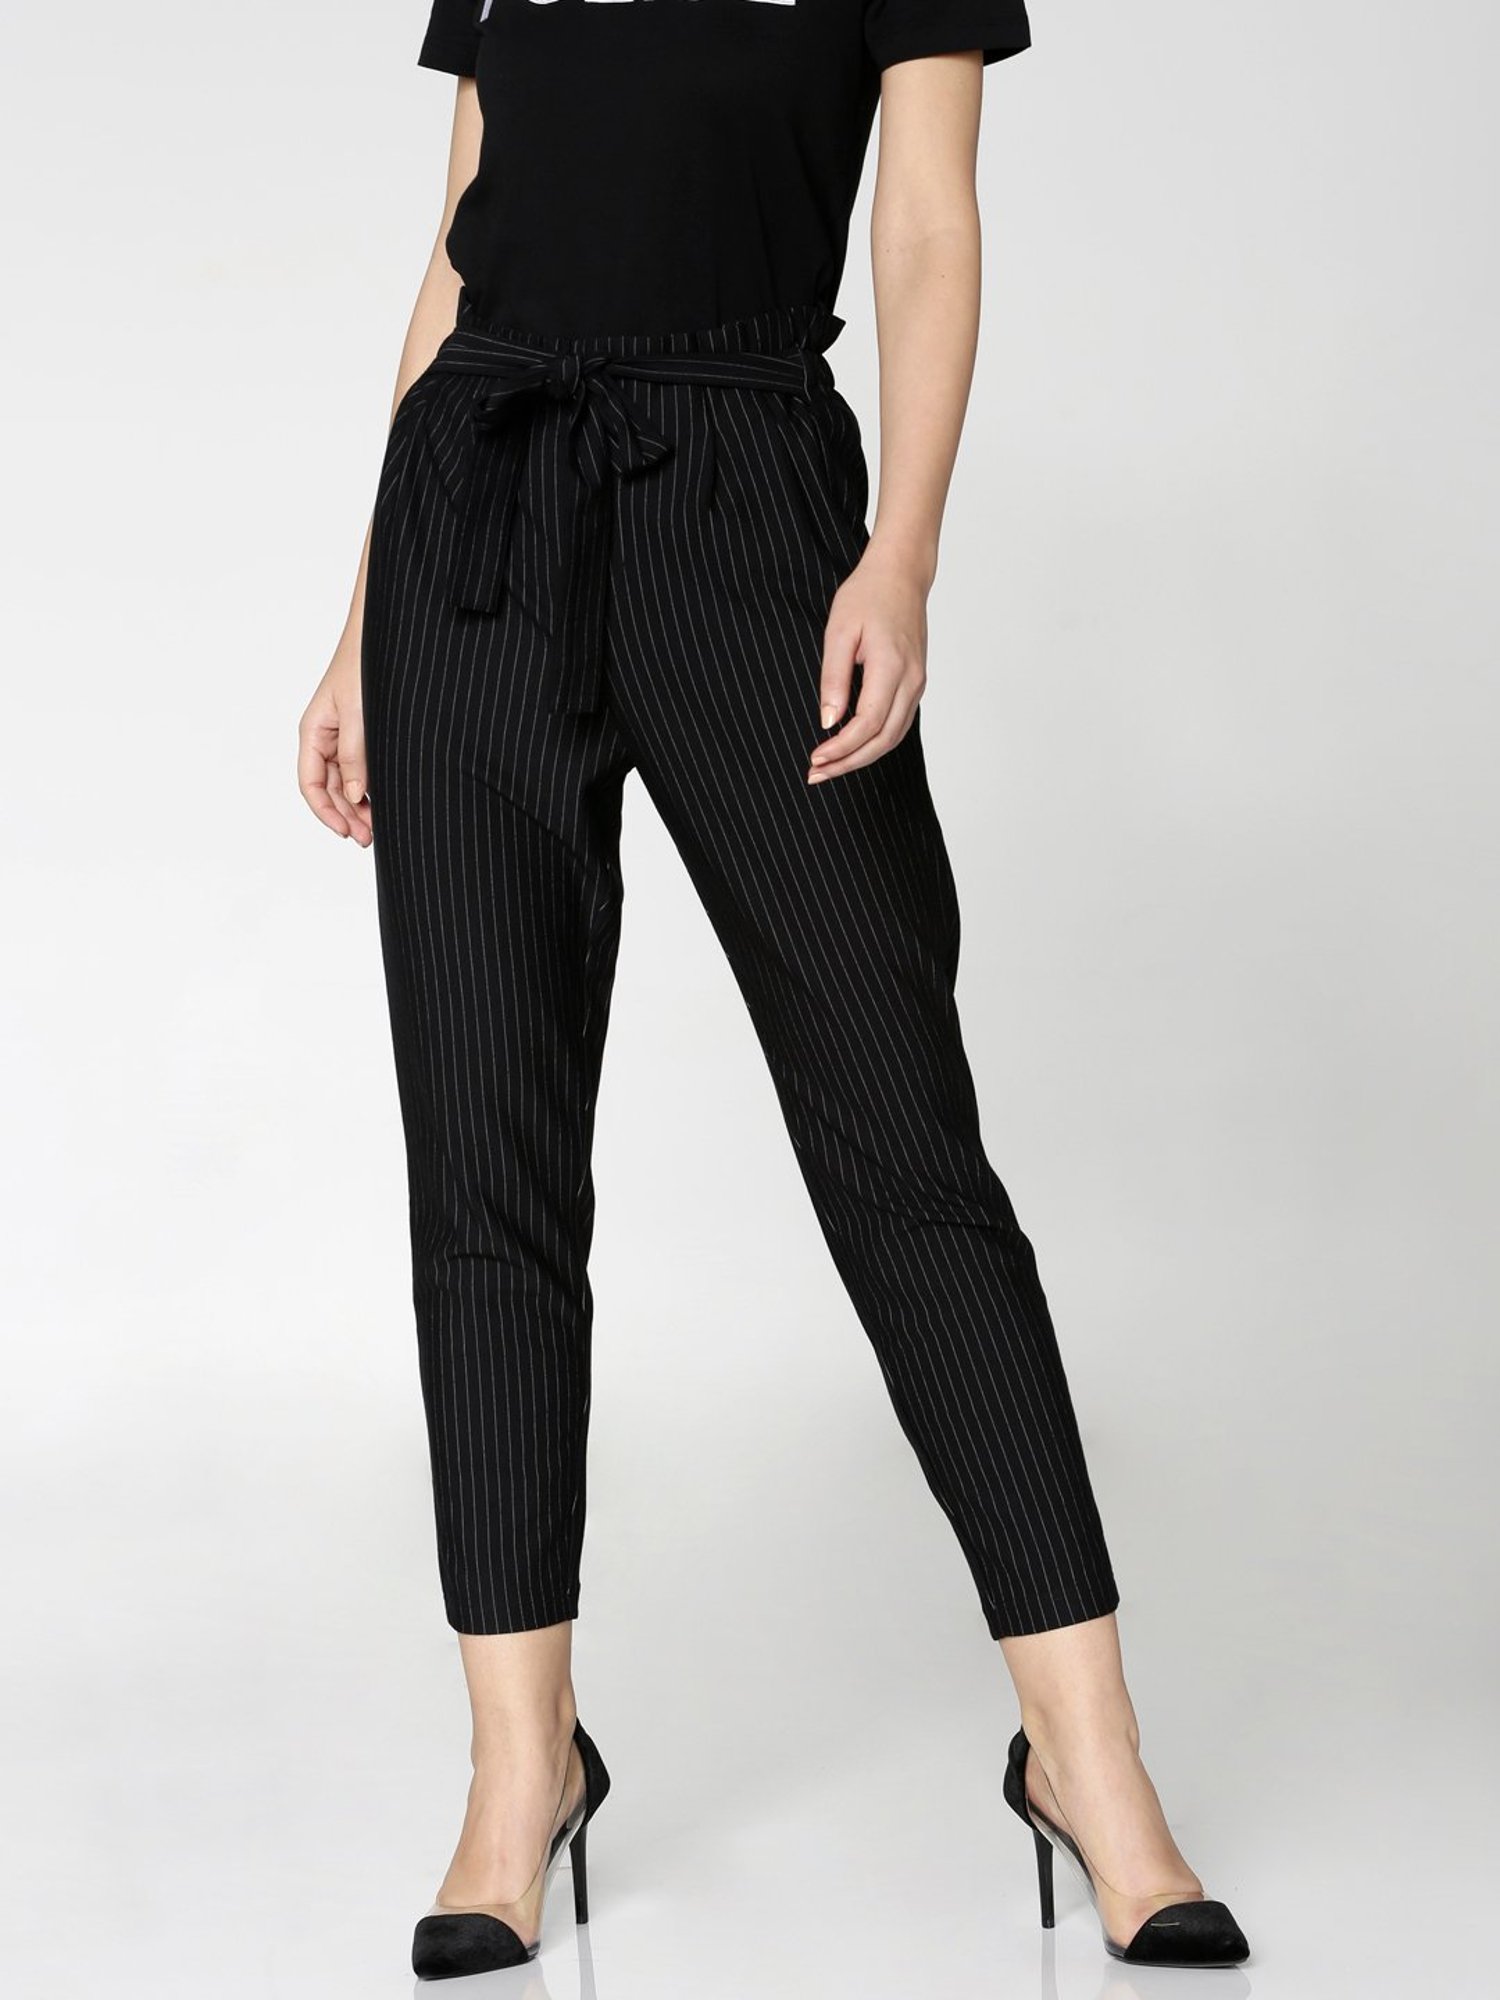 Palazzo Trousers Women High Waist Striped Loose Pants Elegant Office Ladies  Casual Trousers at Rs 1251.87 | Palazzo Pants | ID: 2851547687848